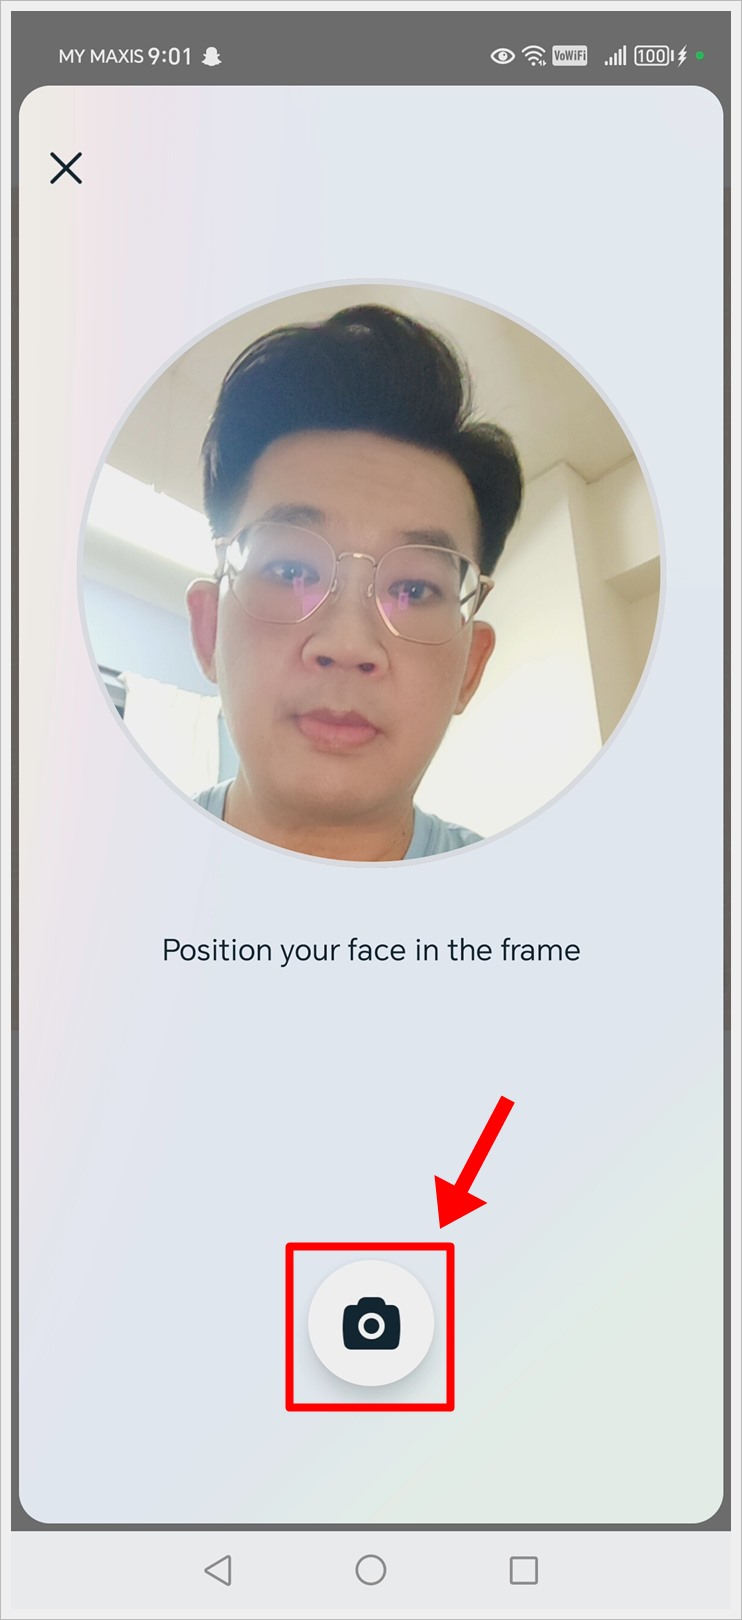 Position your face in the frame and take a photo by tapping the camera icon when you are ready.